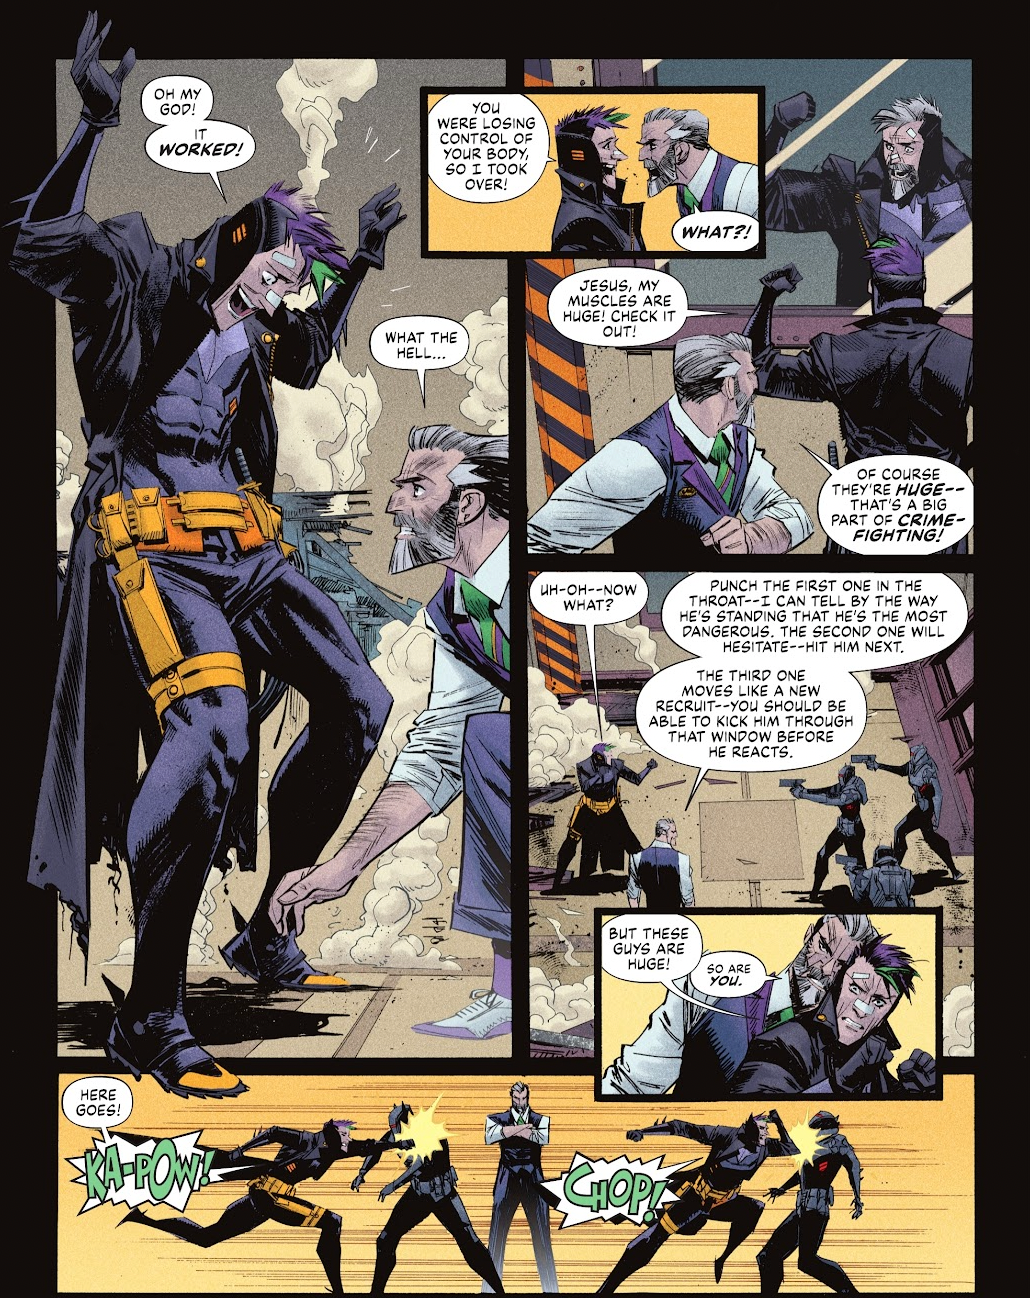 White Knight: DC Puts Batman and the Joker in a Weird, Freaky Friday Situation